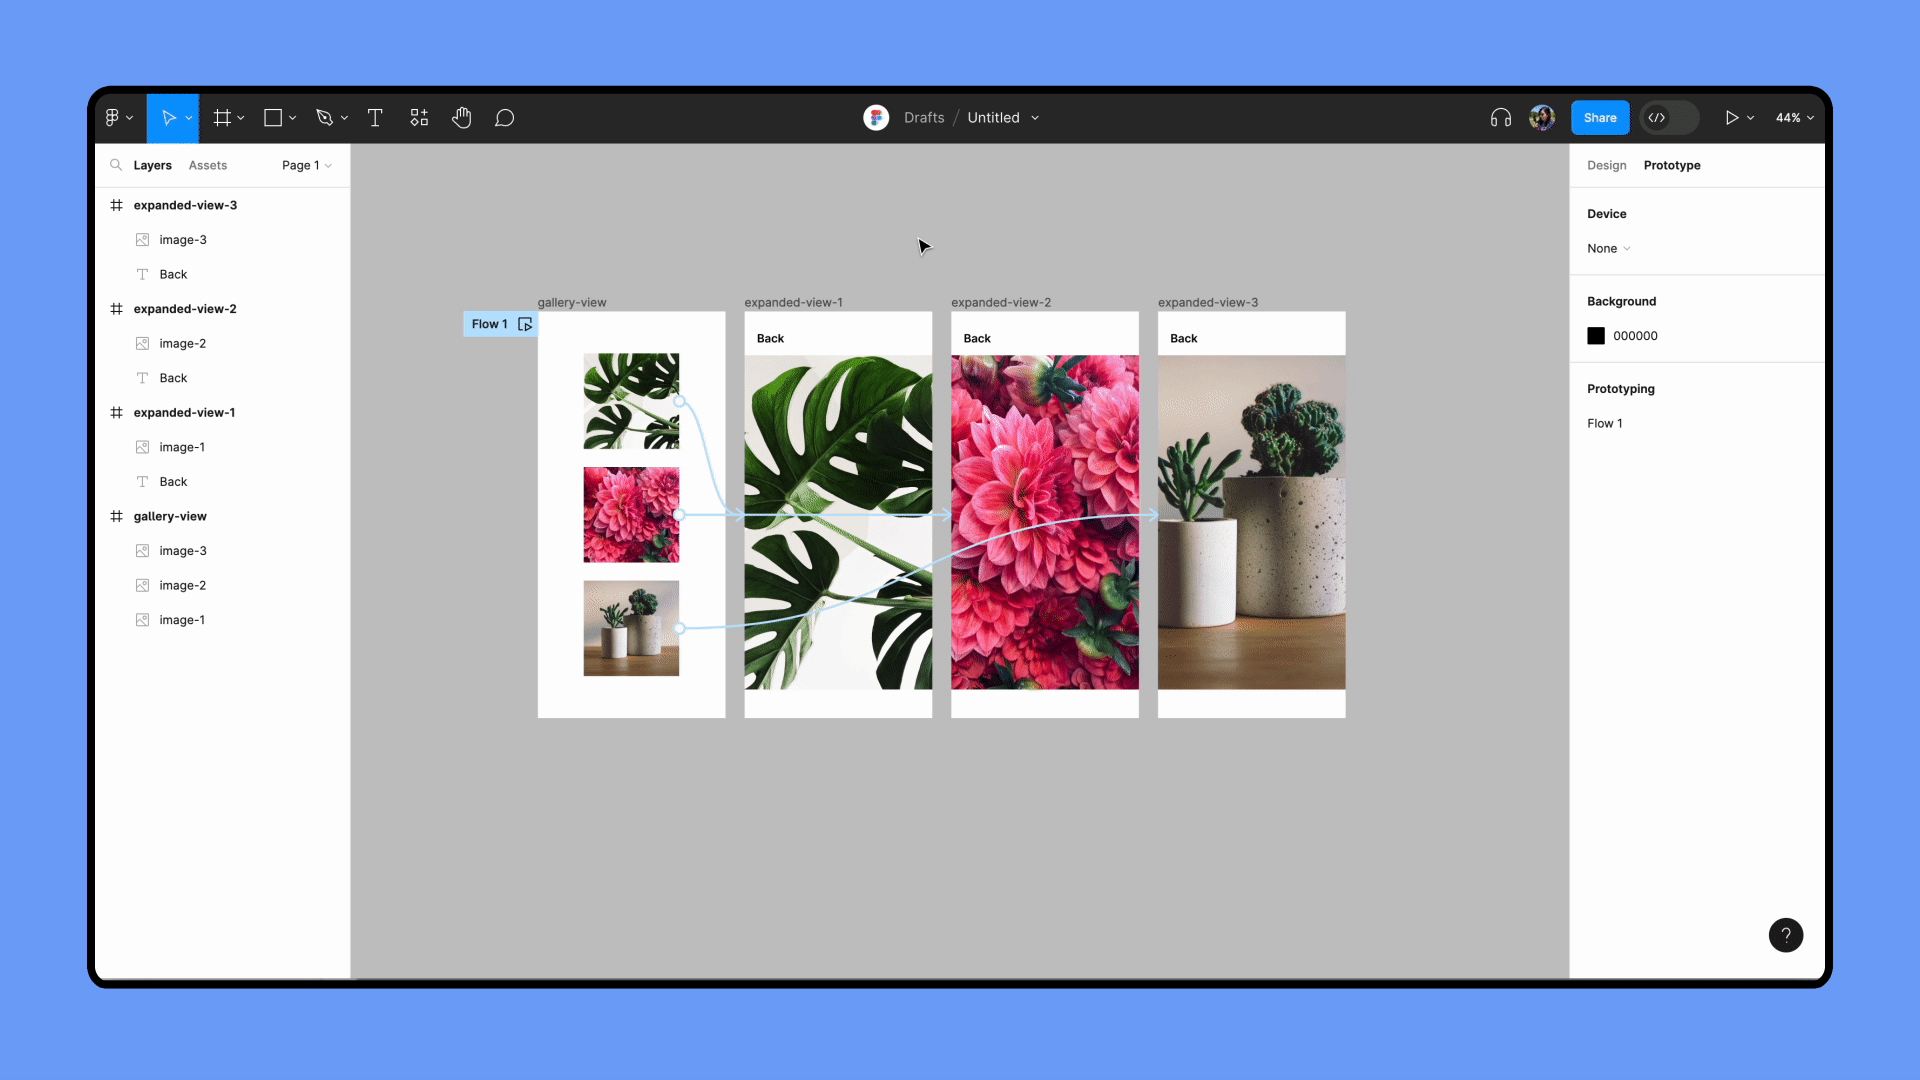 Select each back button then add connections back to gallery view frame.